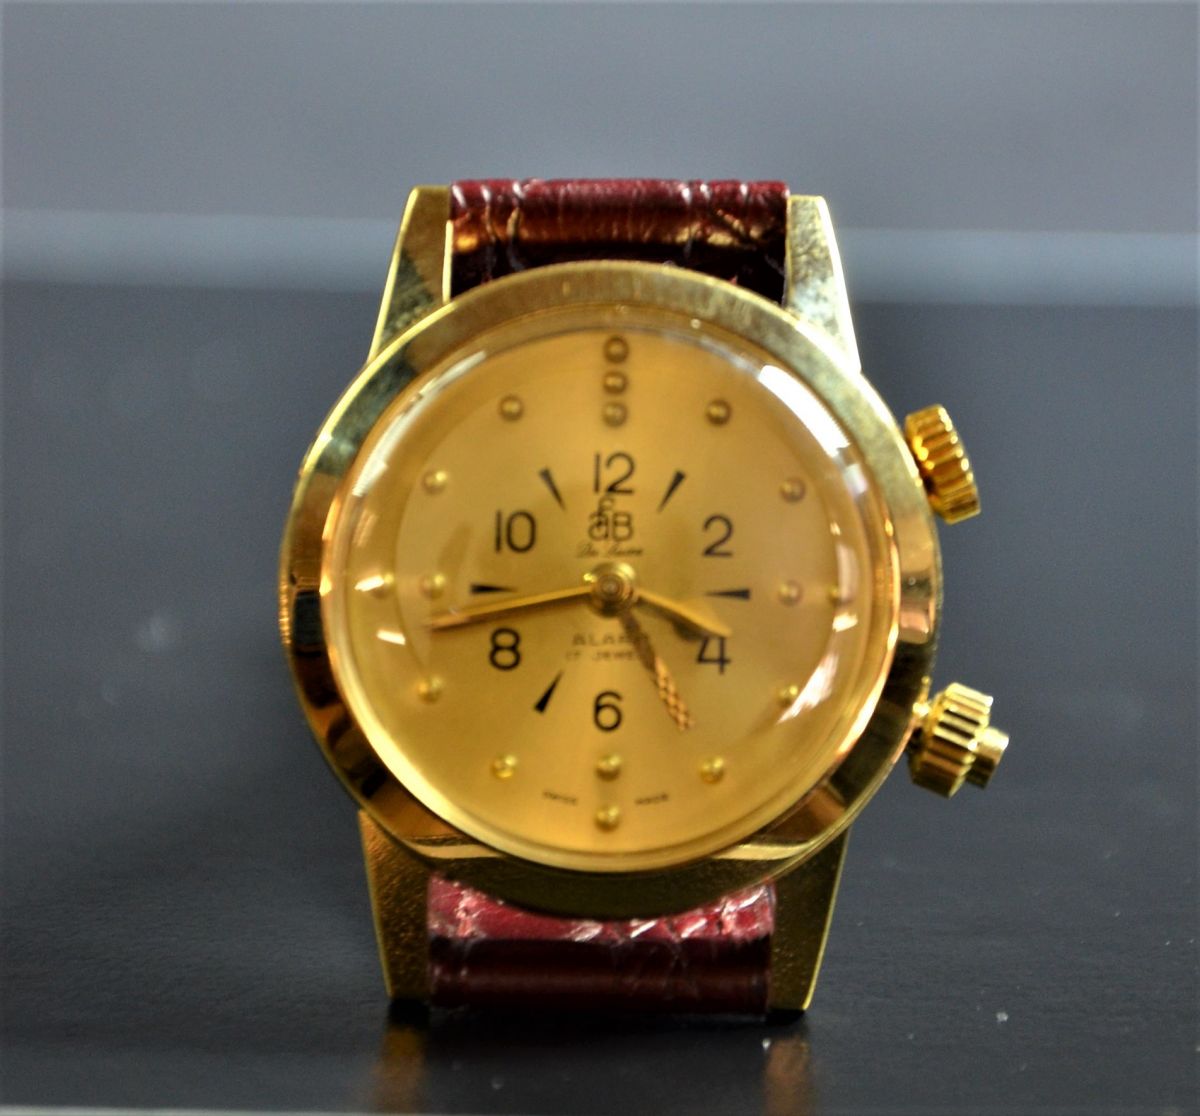 Gilded wristwatch with alarm clock for blind person. Manual winding. New old stock.